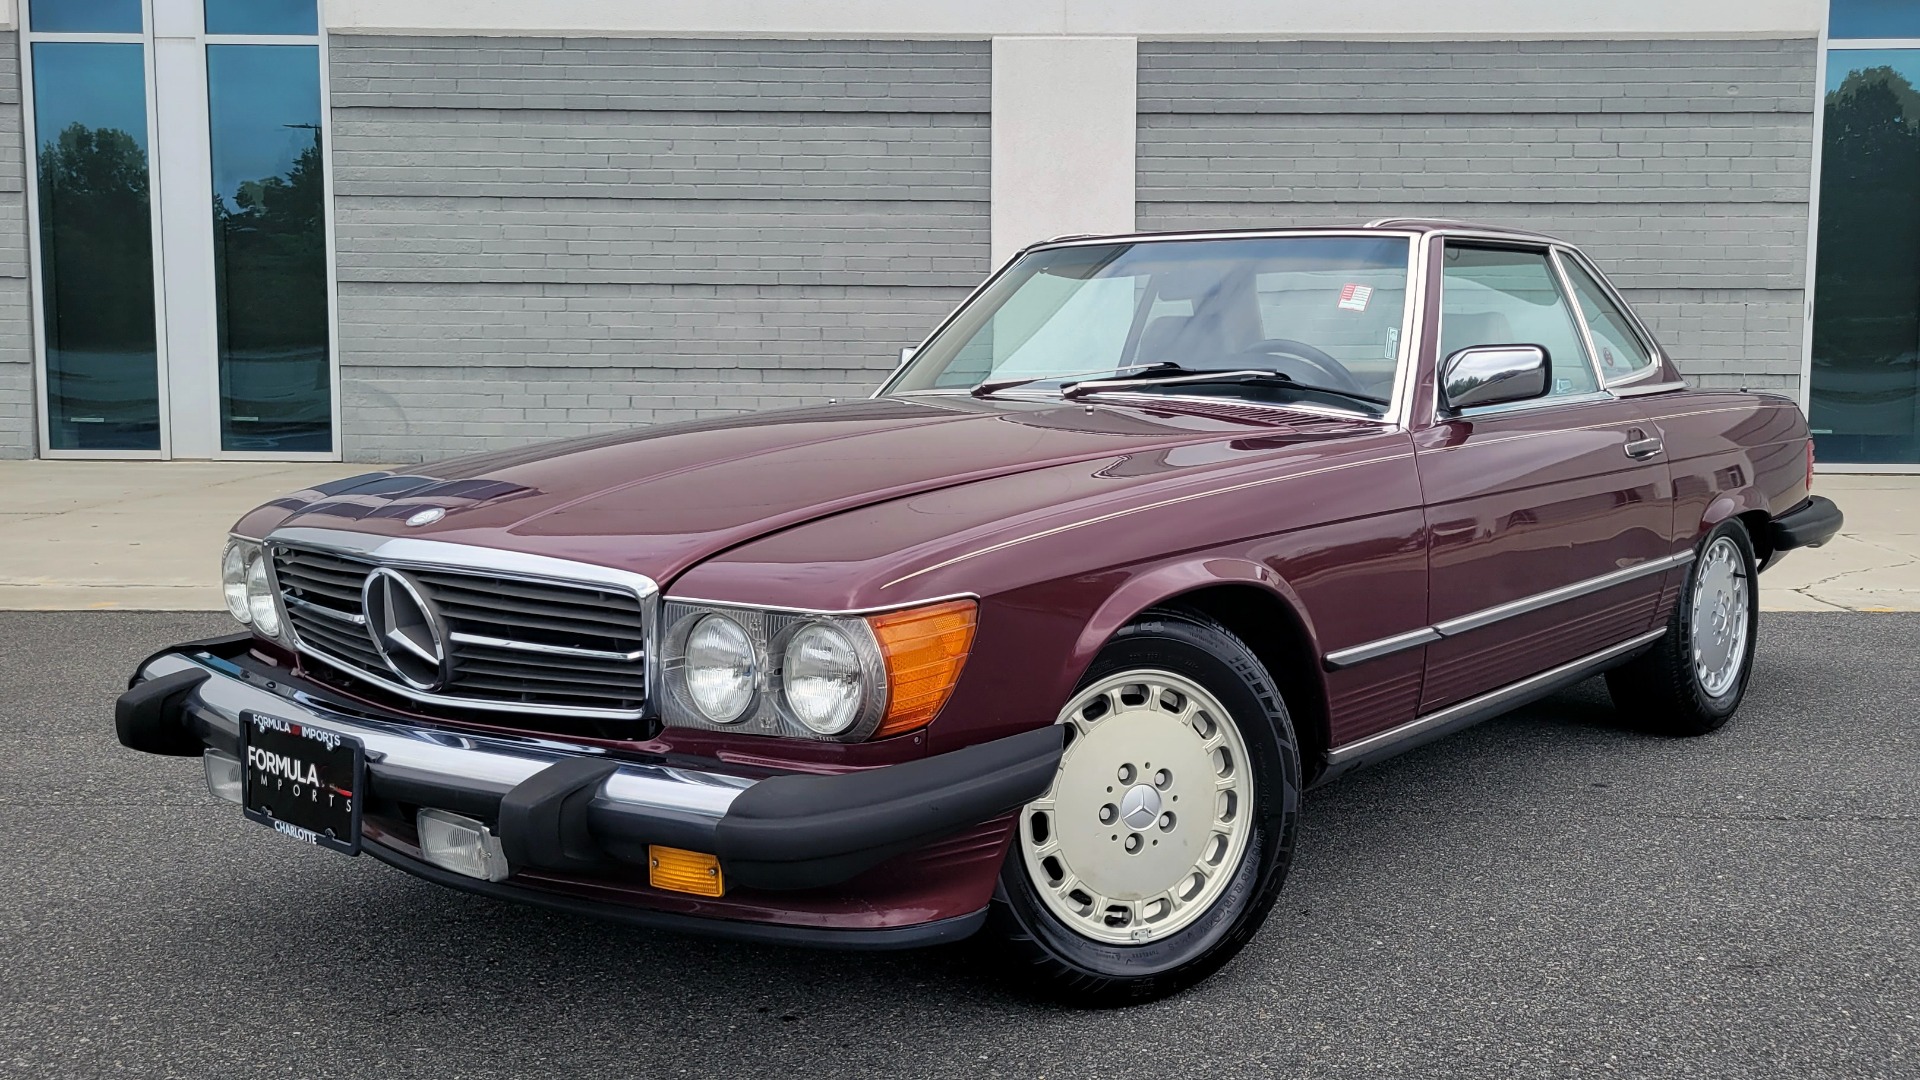 Used 1987 Mercedes-Benz 560 SERIES 560SL ROADSTER / 5.6L V8 / AUTO / LEATHER / ALPINE for sale $16,700 at Formula Imports in Charlotte NC 28227 1